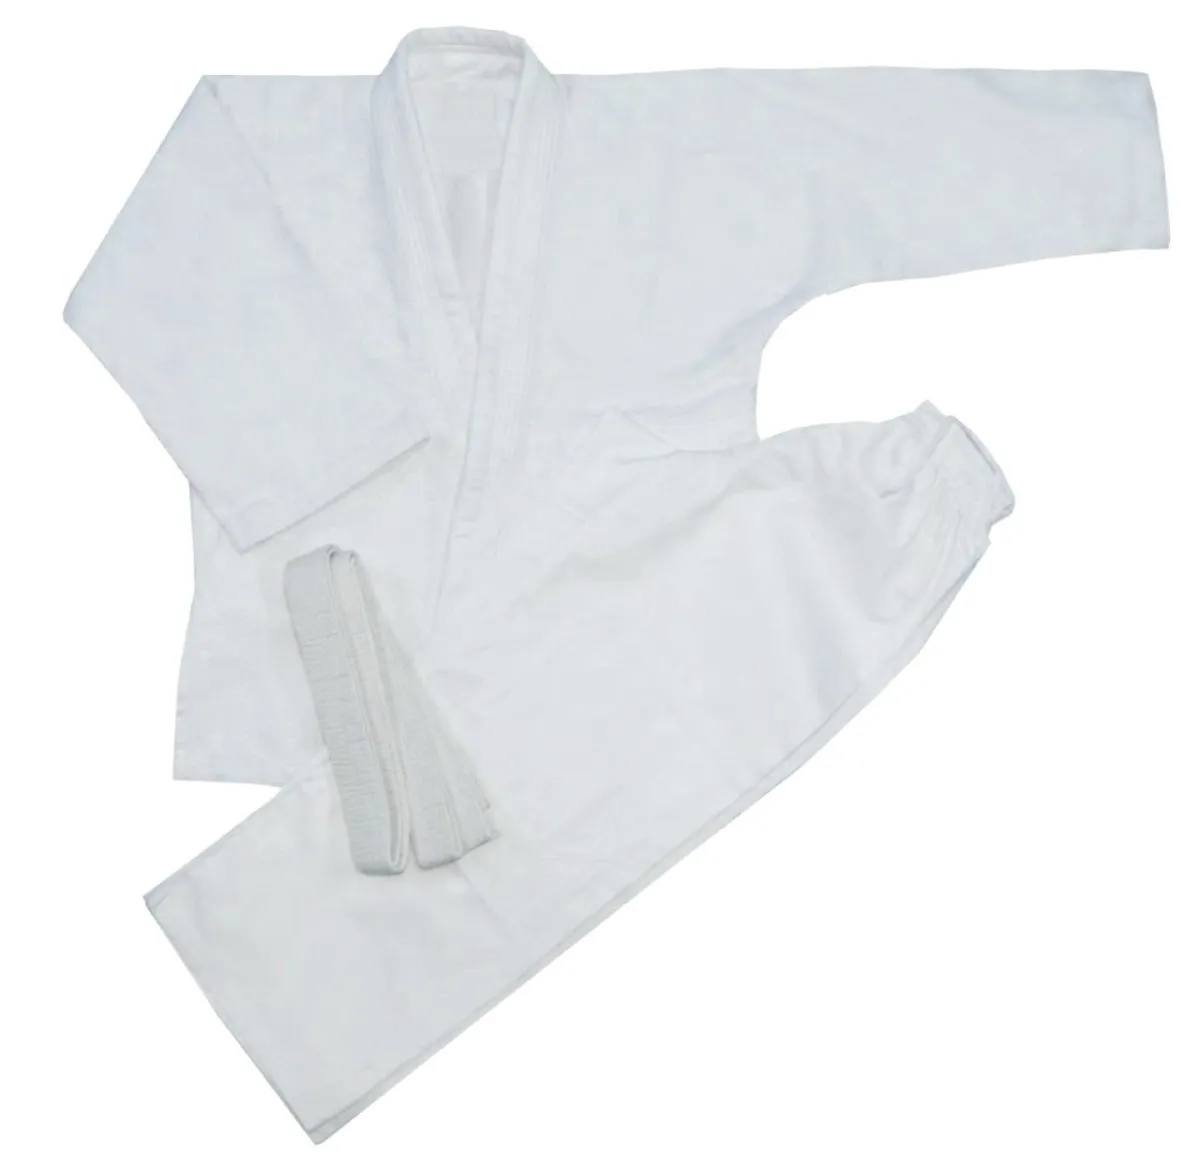 Basic judo suit for children and adults, with white tear-grain weave